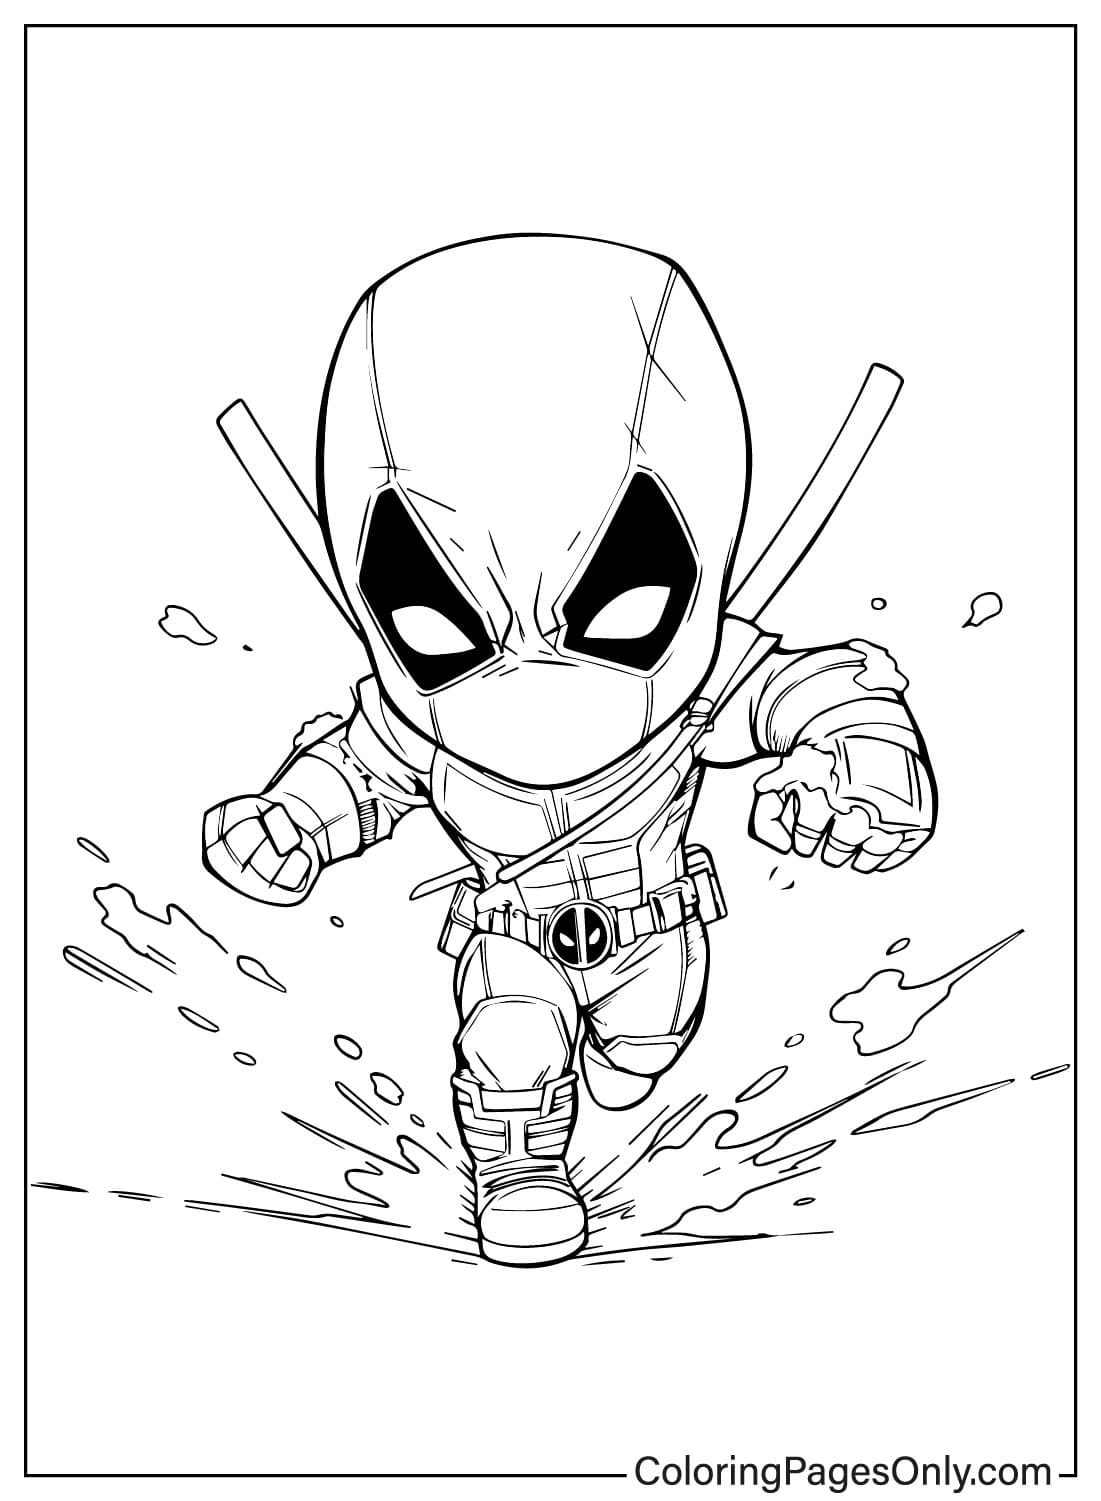 Chibi Deadpool Coloring Page